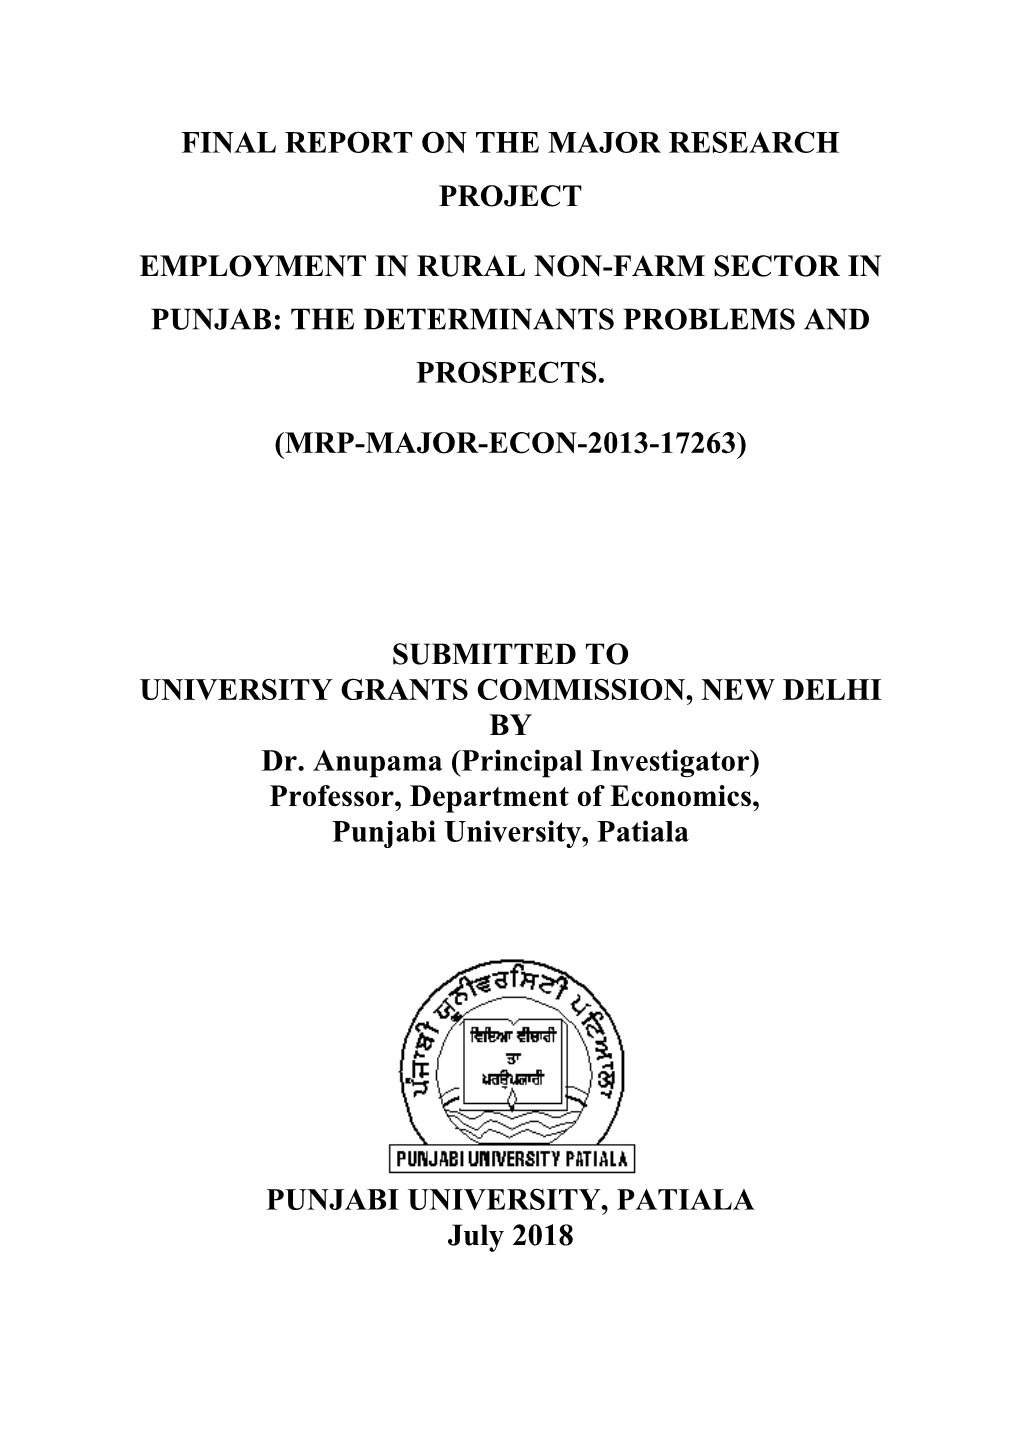 Employment in Rural Non-Farm Sector in Punjab: the Determinants Problems and Prospects